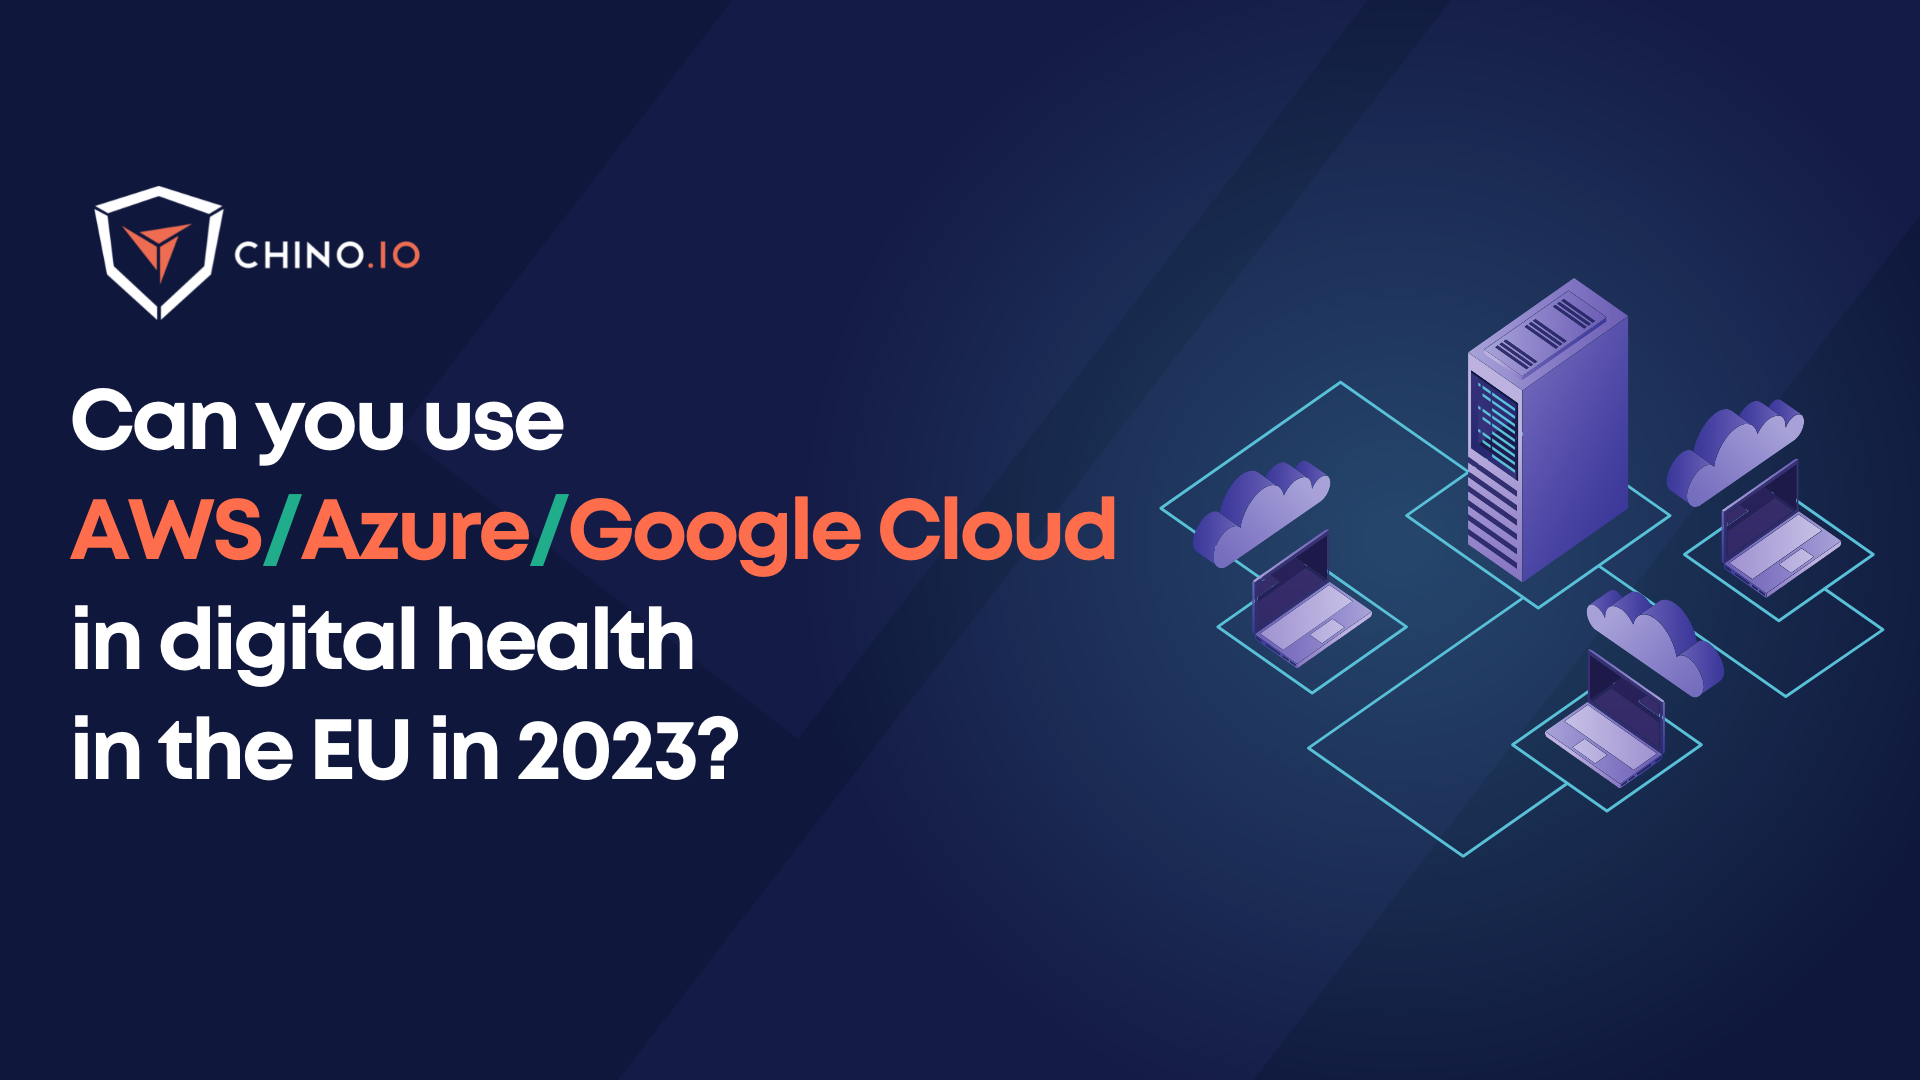 Blog banner that says "Can you use AWS/Azure/Google Cloud in digital health in 2023?" On the right the icon of a server